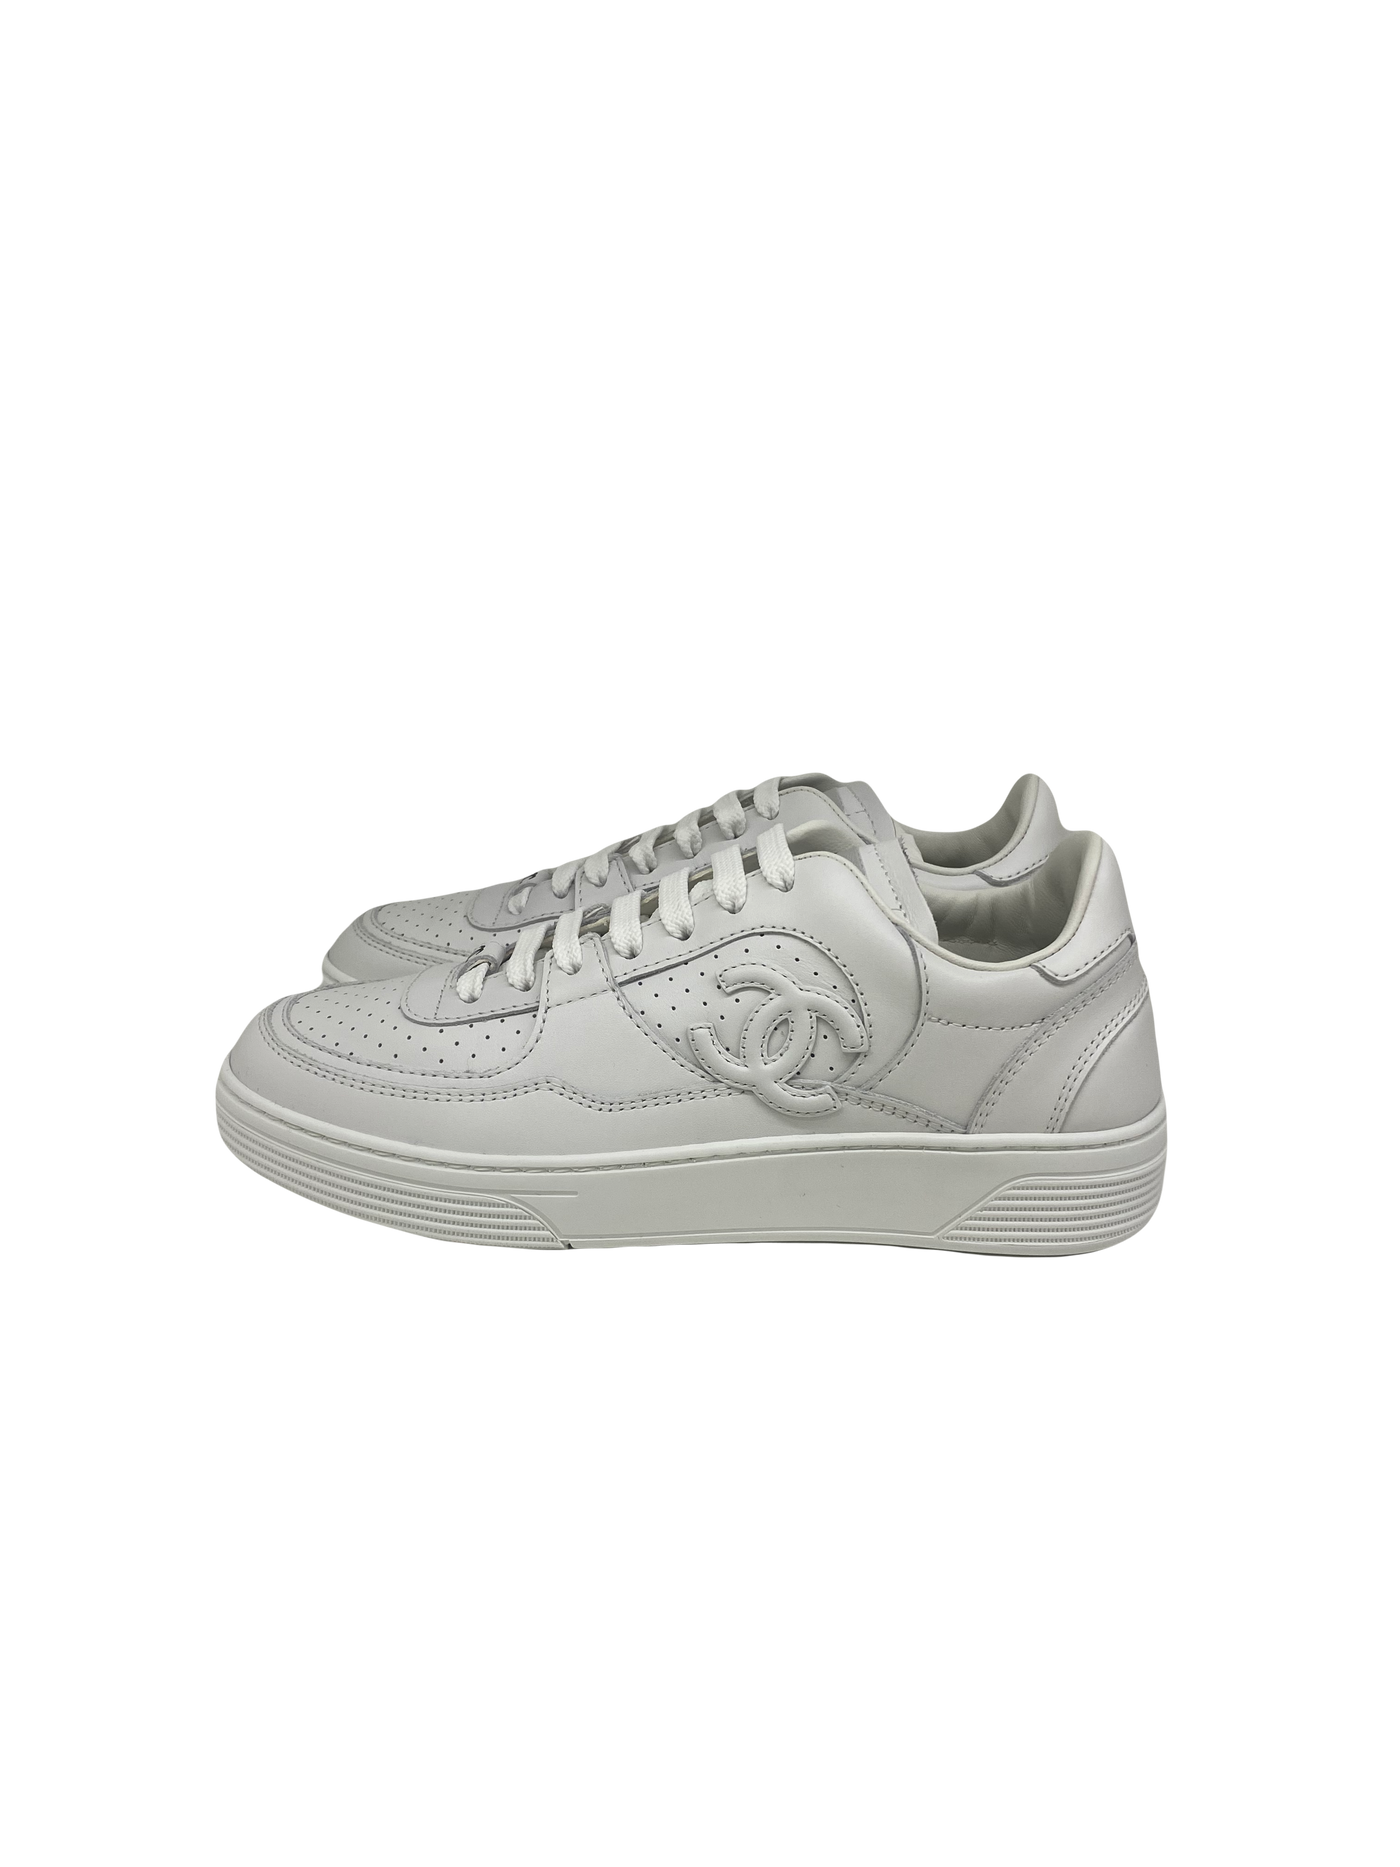 Chanel White Sneakers 36.5 2023